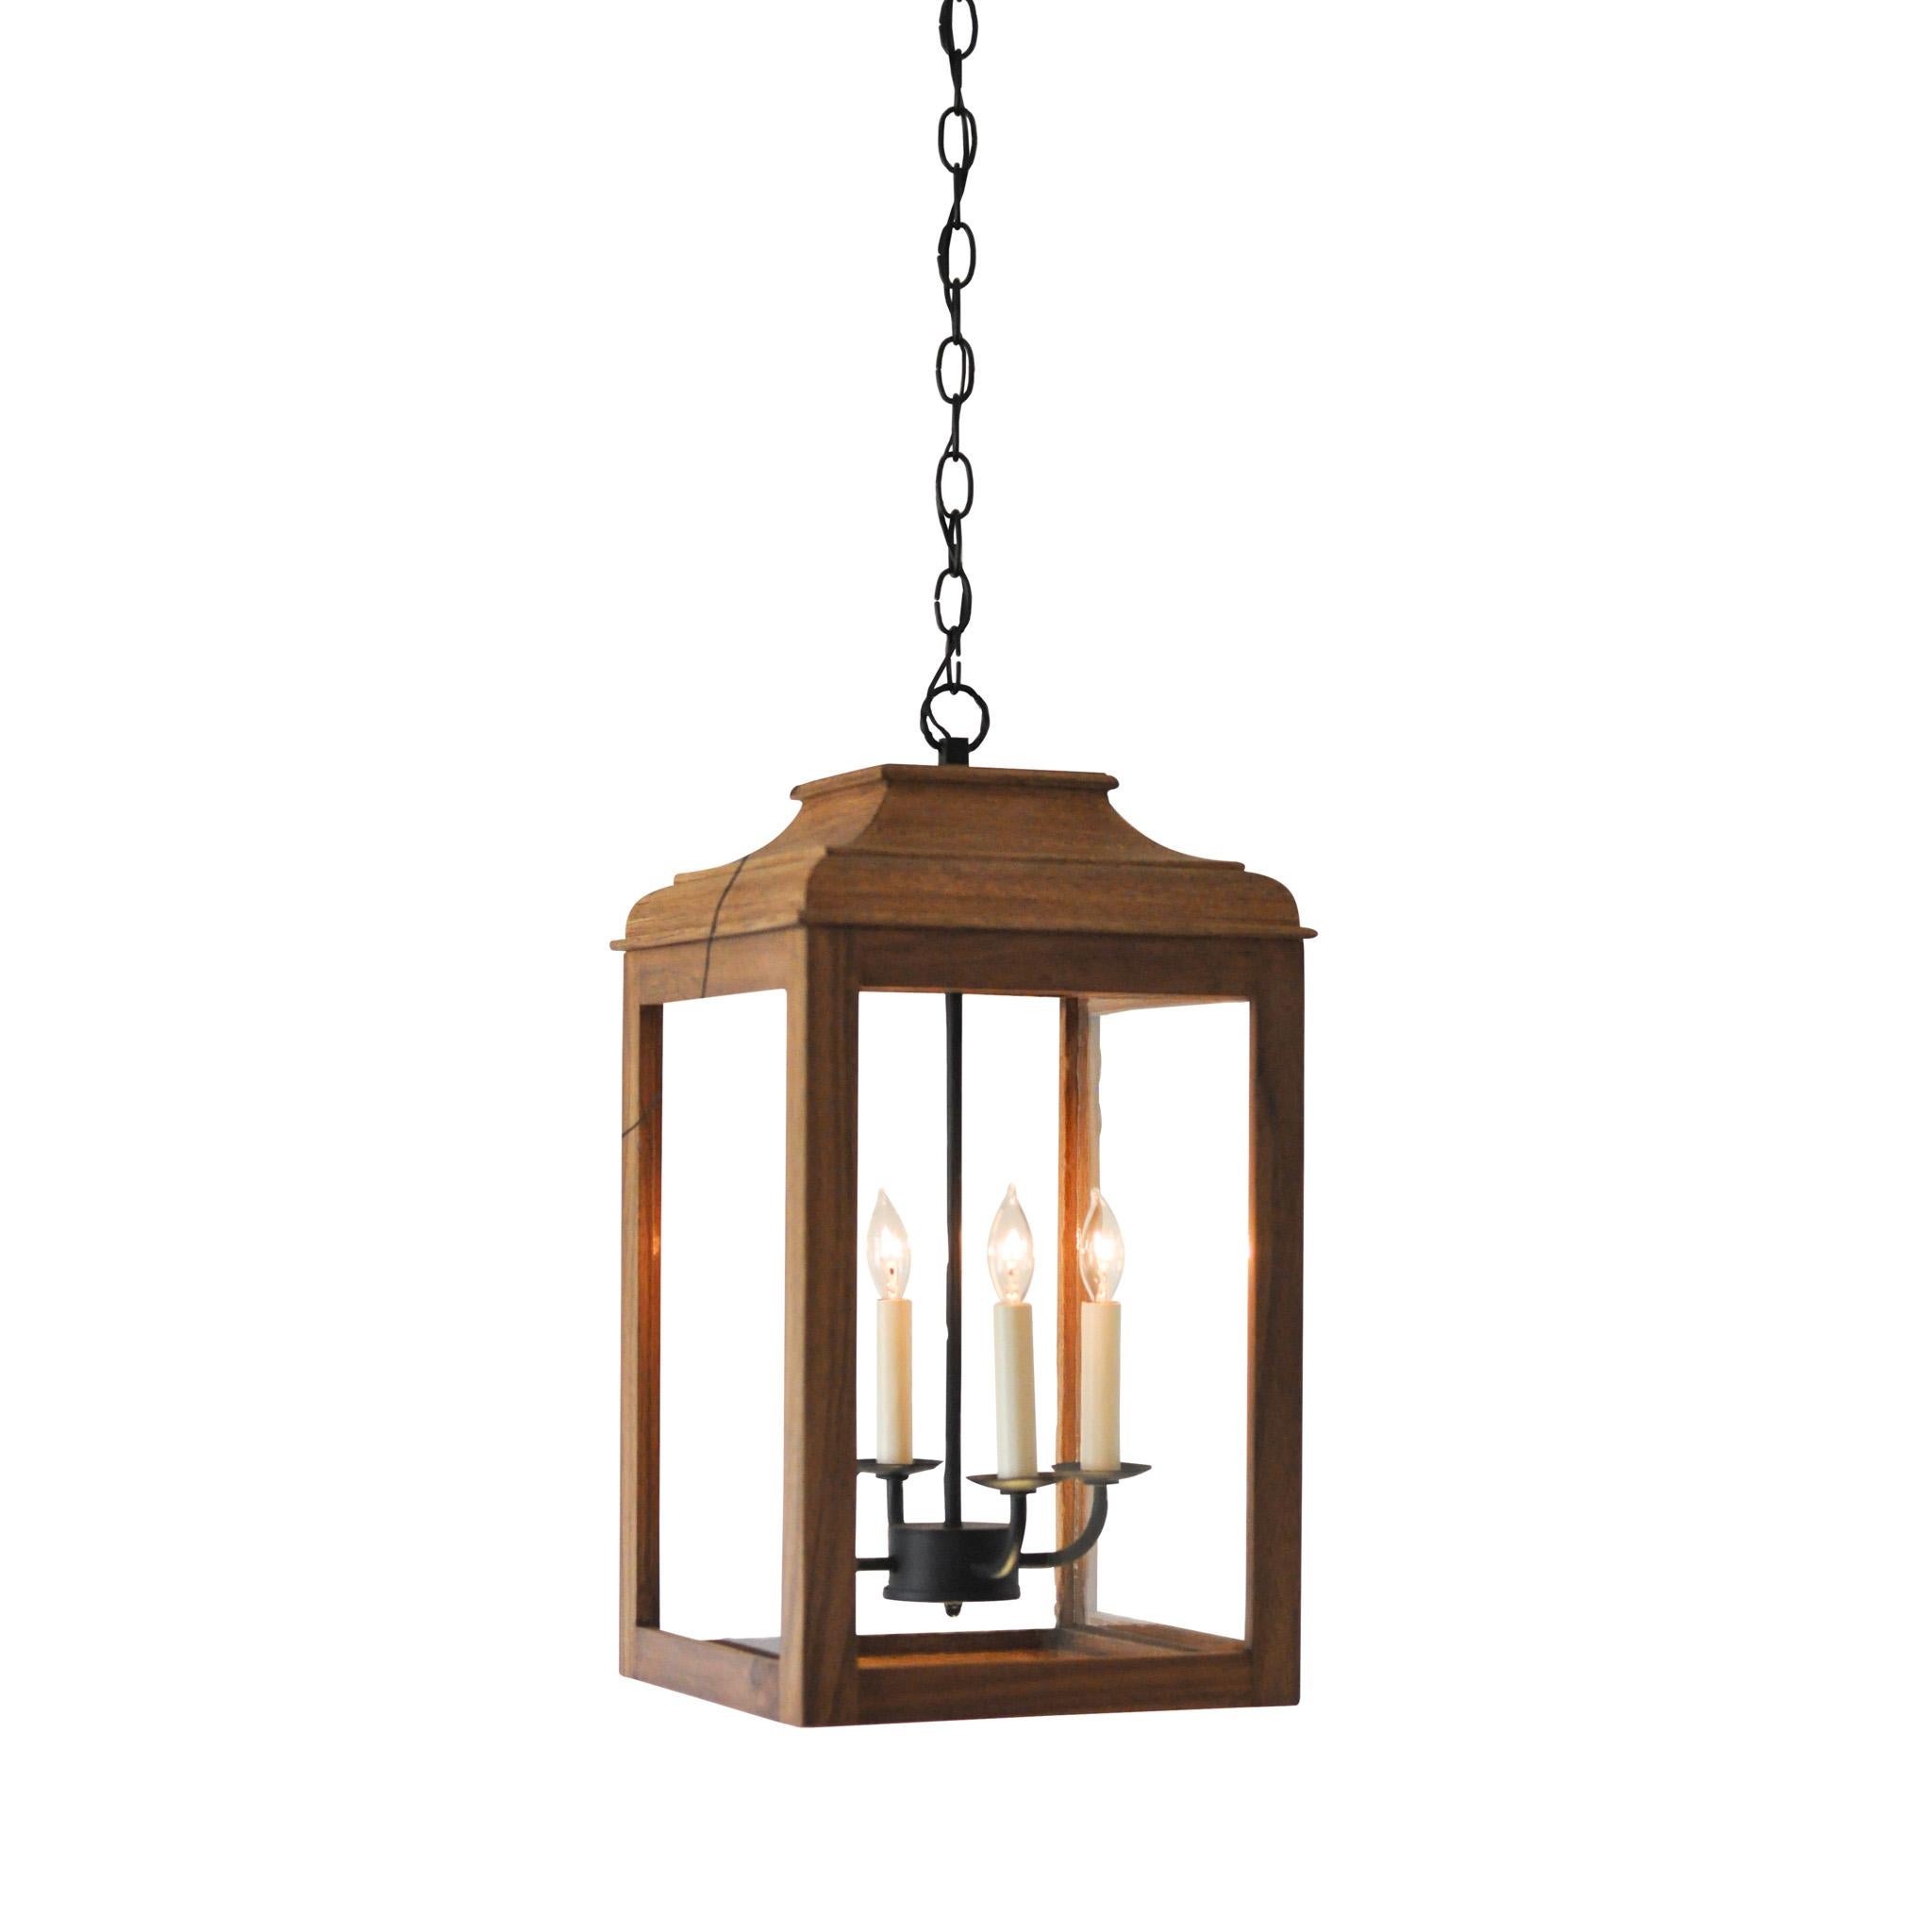 American Lutyens Hanging Lantern, Estate, Finish Natural Wood, Charred Iron Candle Holder For Sale